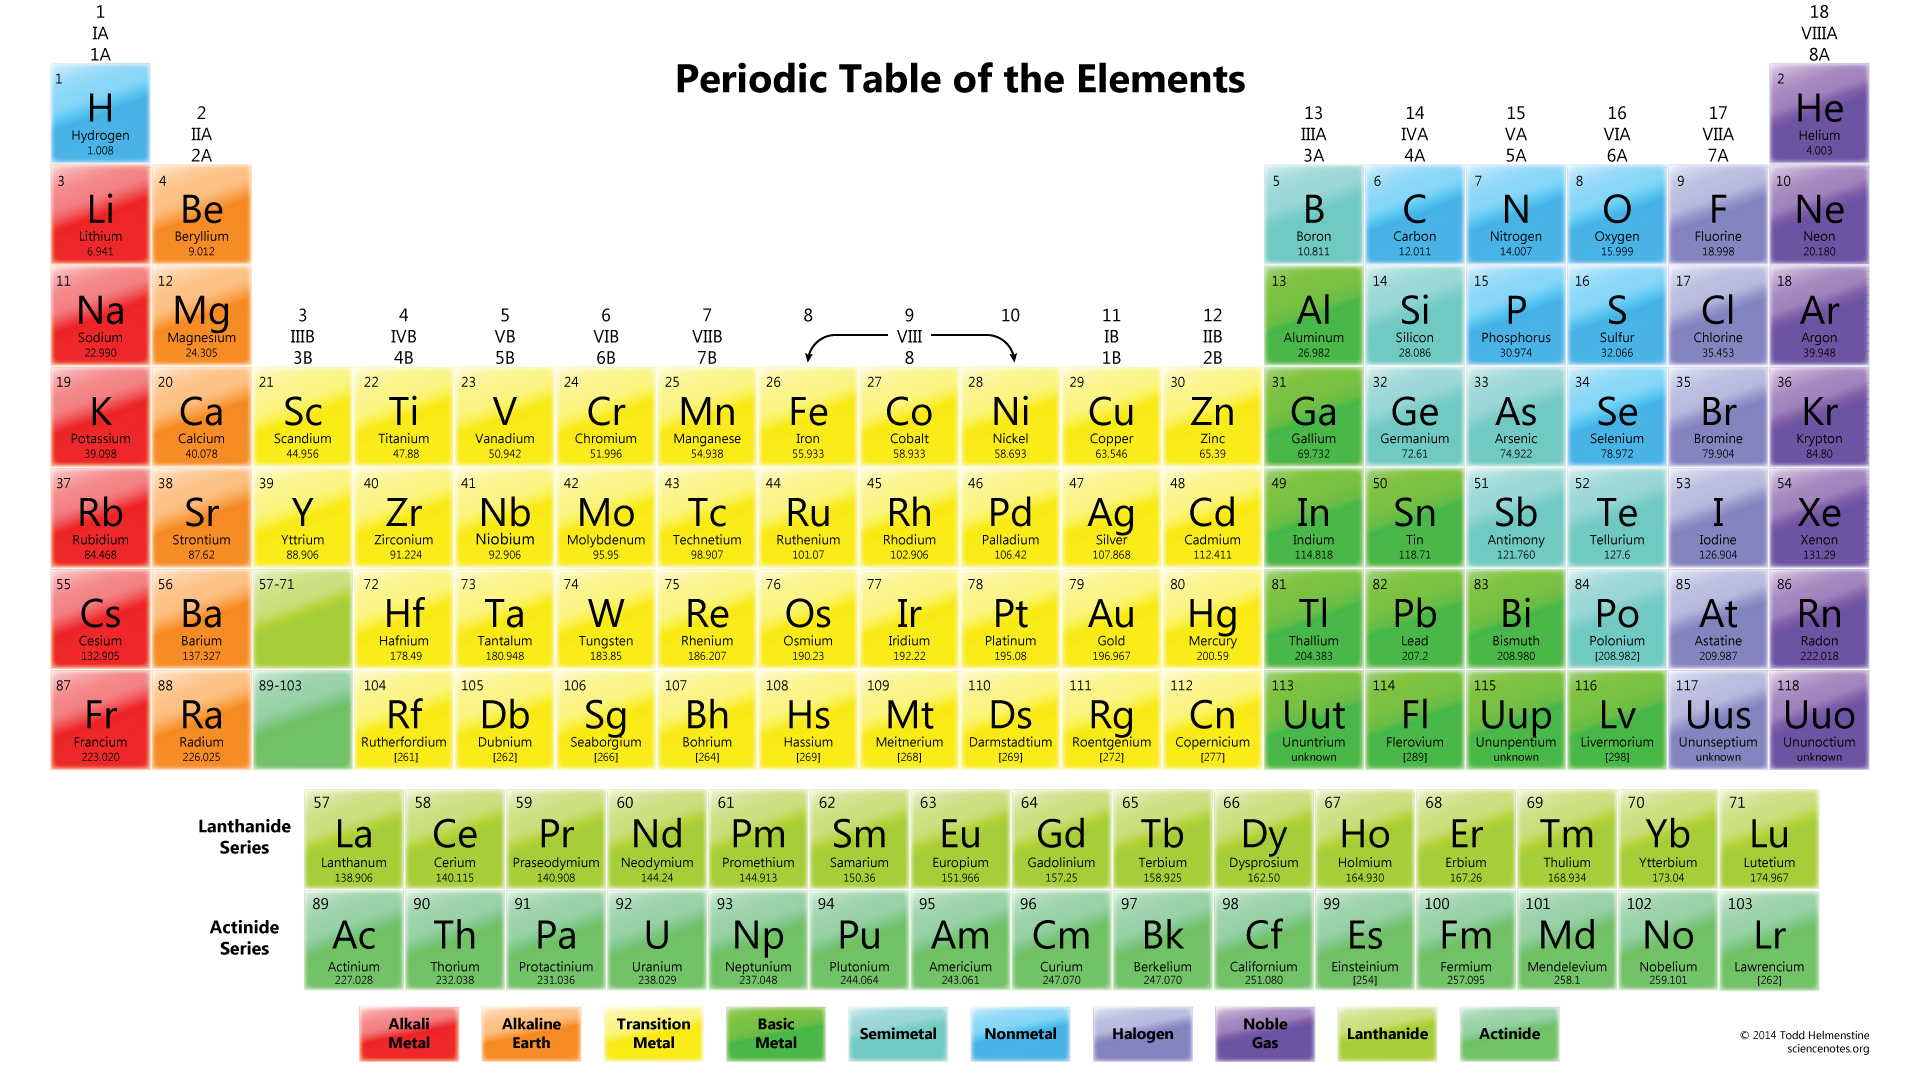 http://sciencenotes.org/colorful-periodic-table-wallpaper/